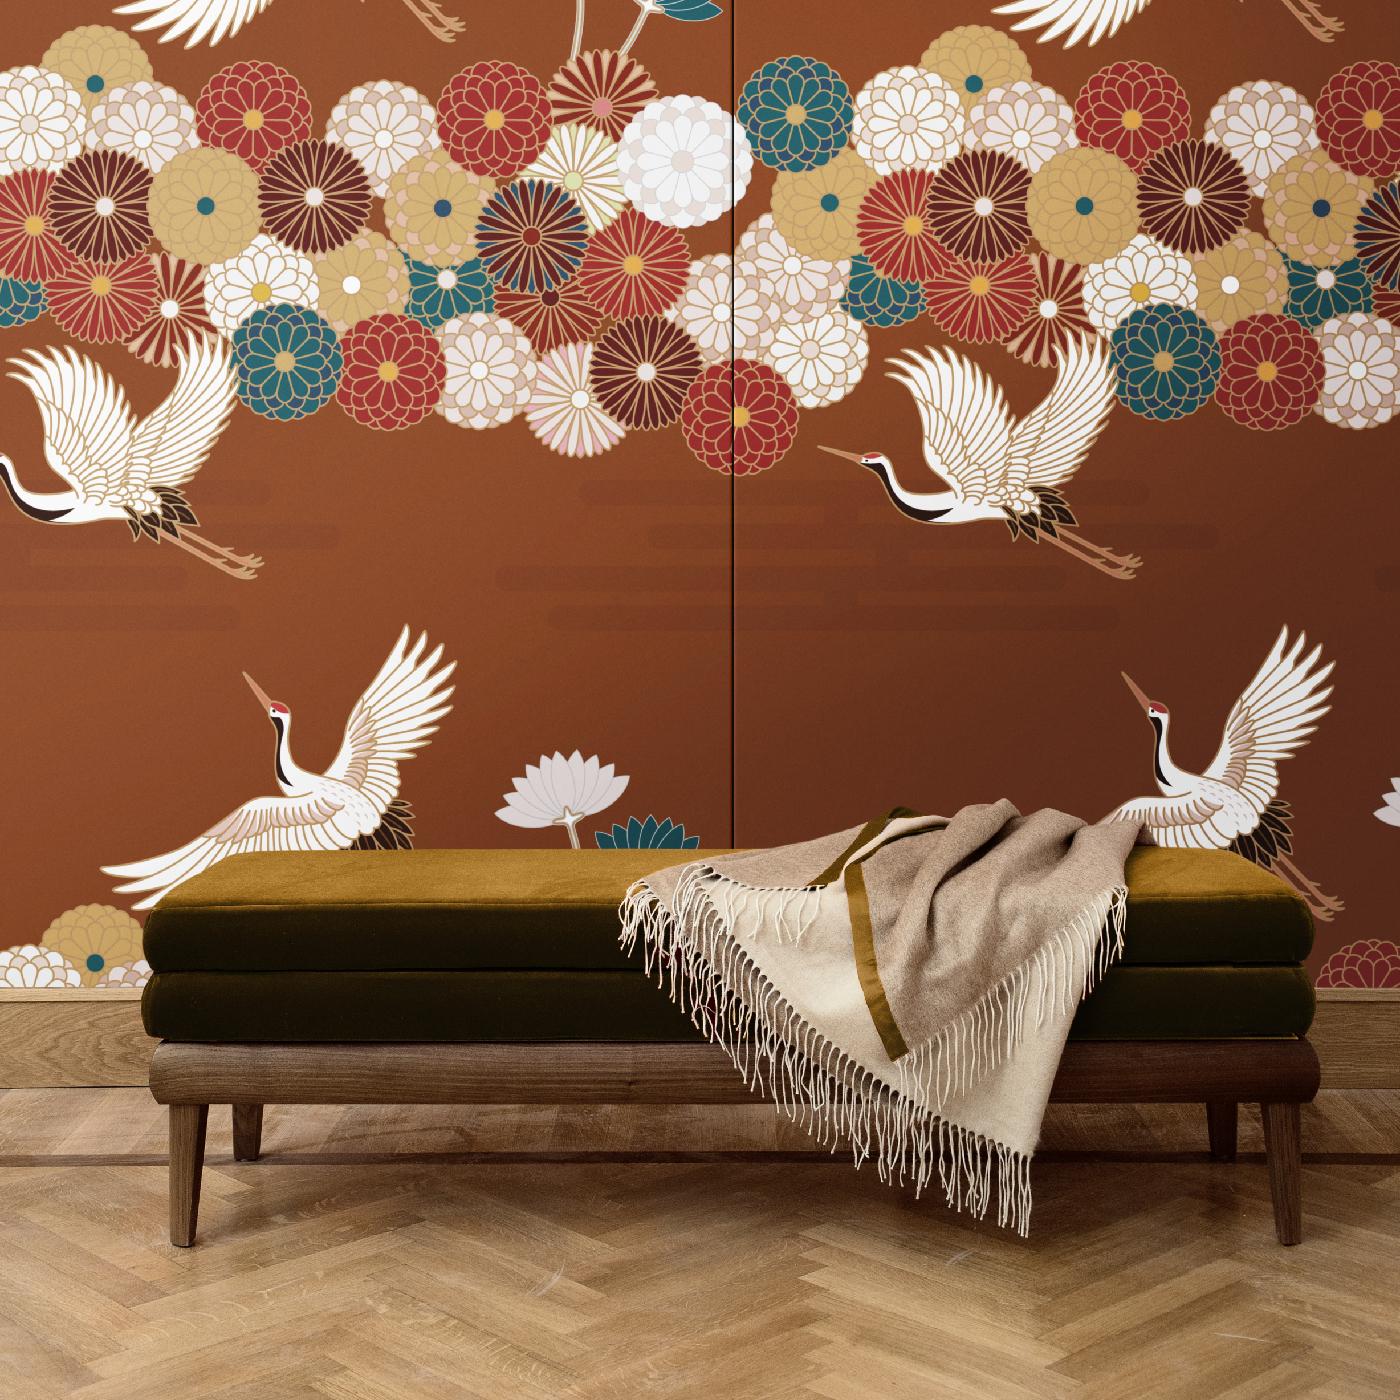 This superb wall decoration will add a dramatic accent to any wall in the house. Inspired by Japanese art, this design features stylized flowers and flying storks over a stunning crimson background in cotton and silk. This unique piece is one of